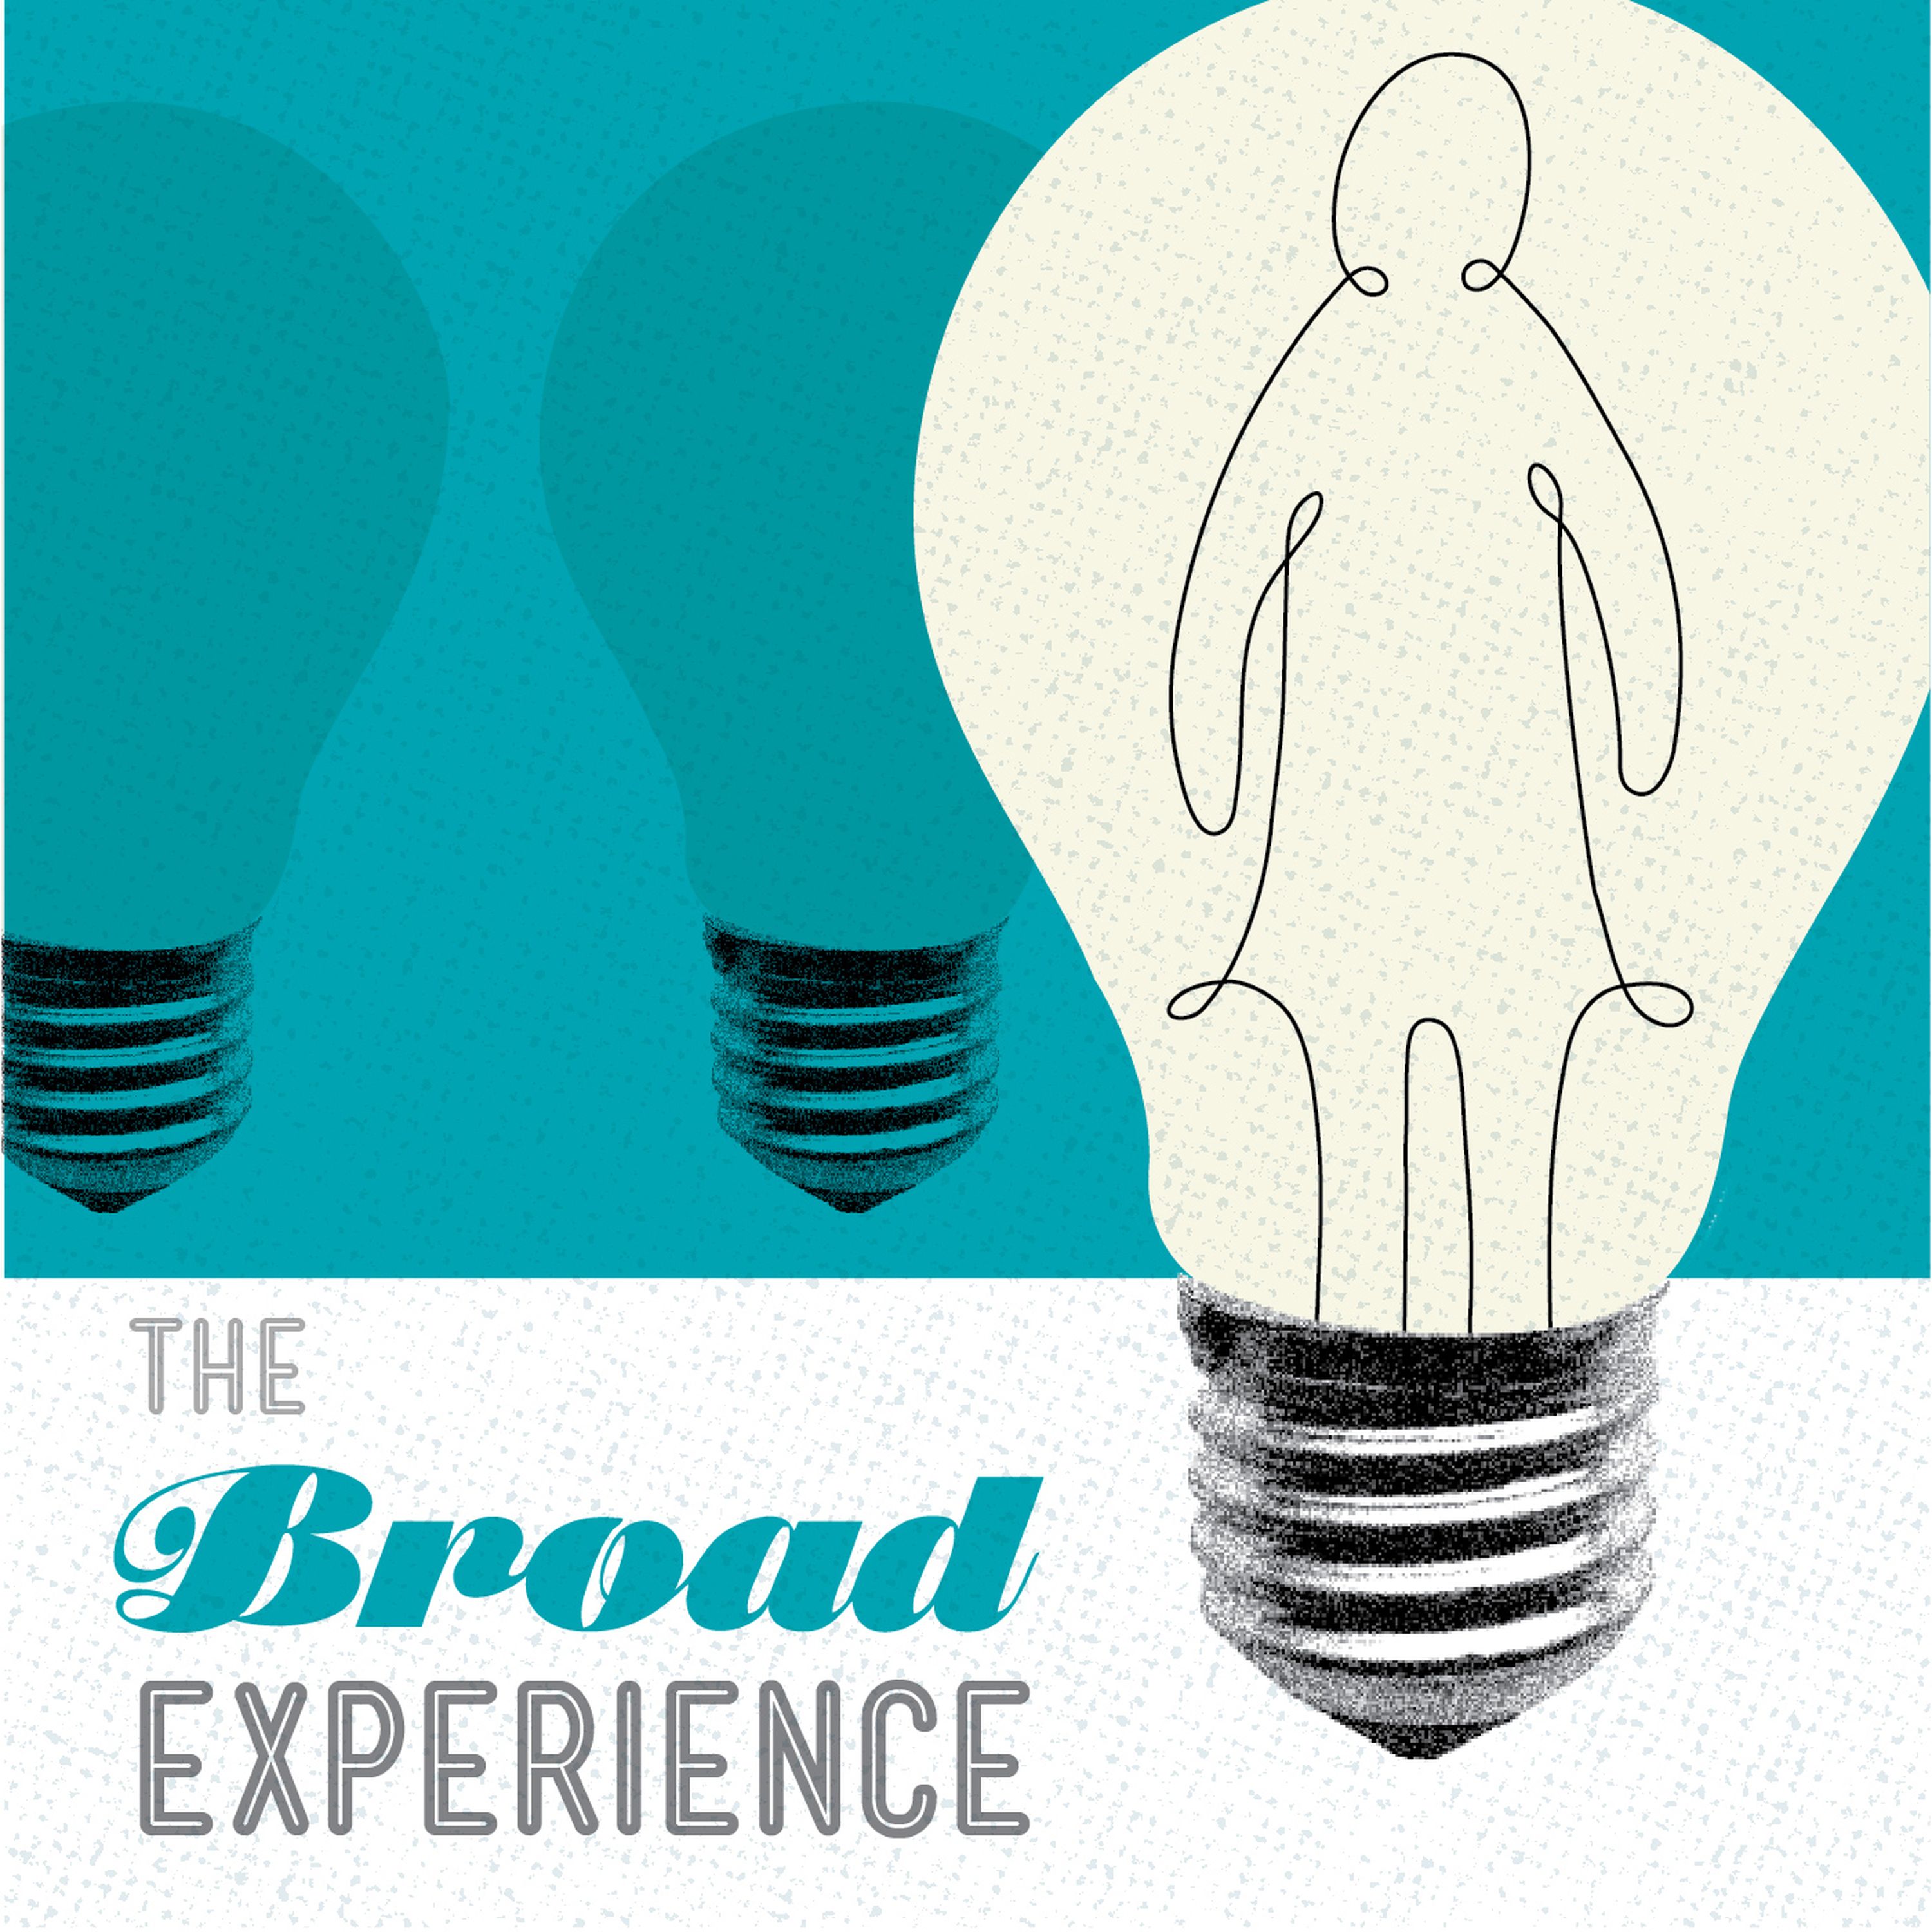 The Broad Experience 43: Navigating expectations